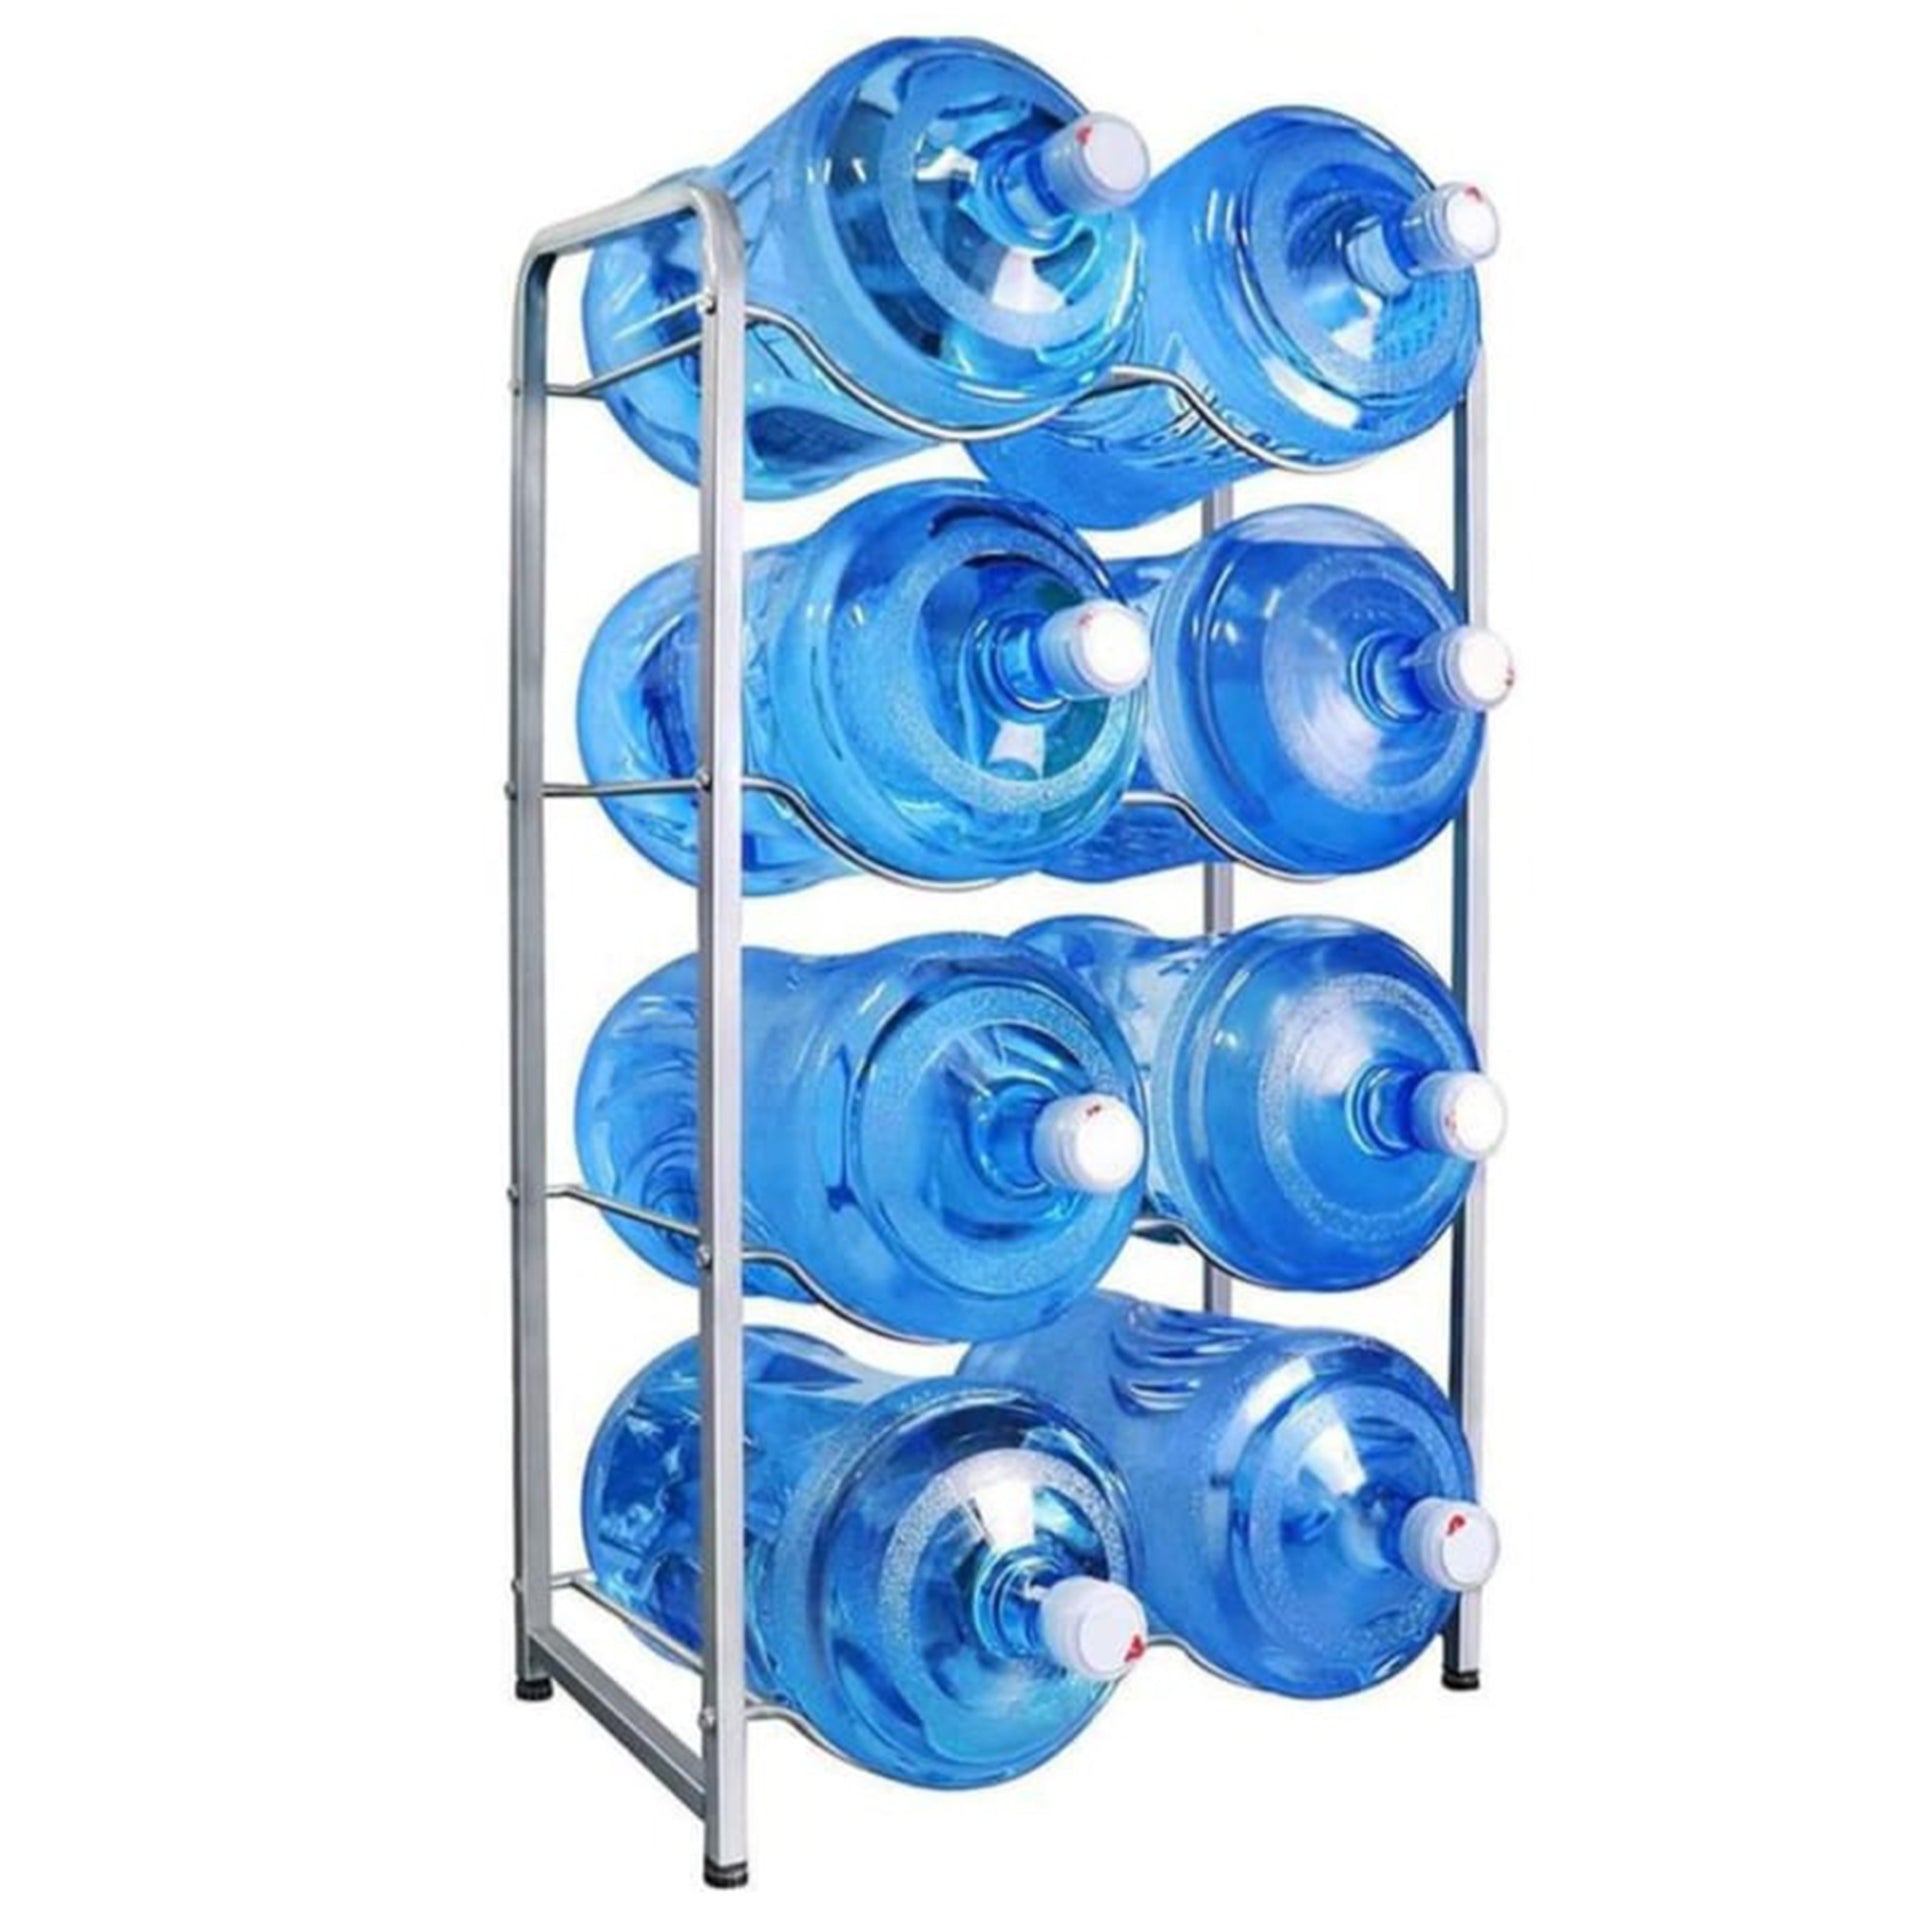 Water Bottle Stand 8 Levels (5 Gallons)